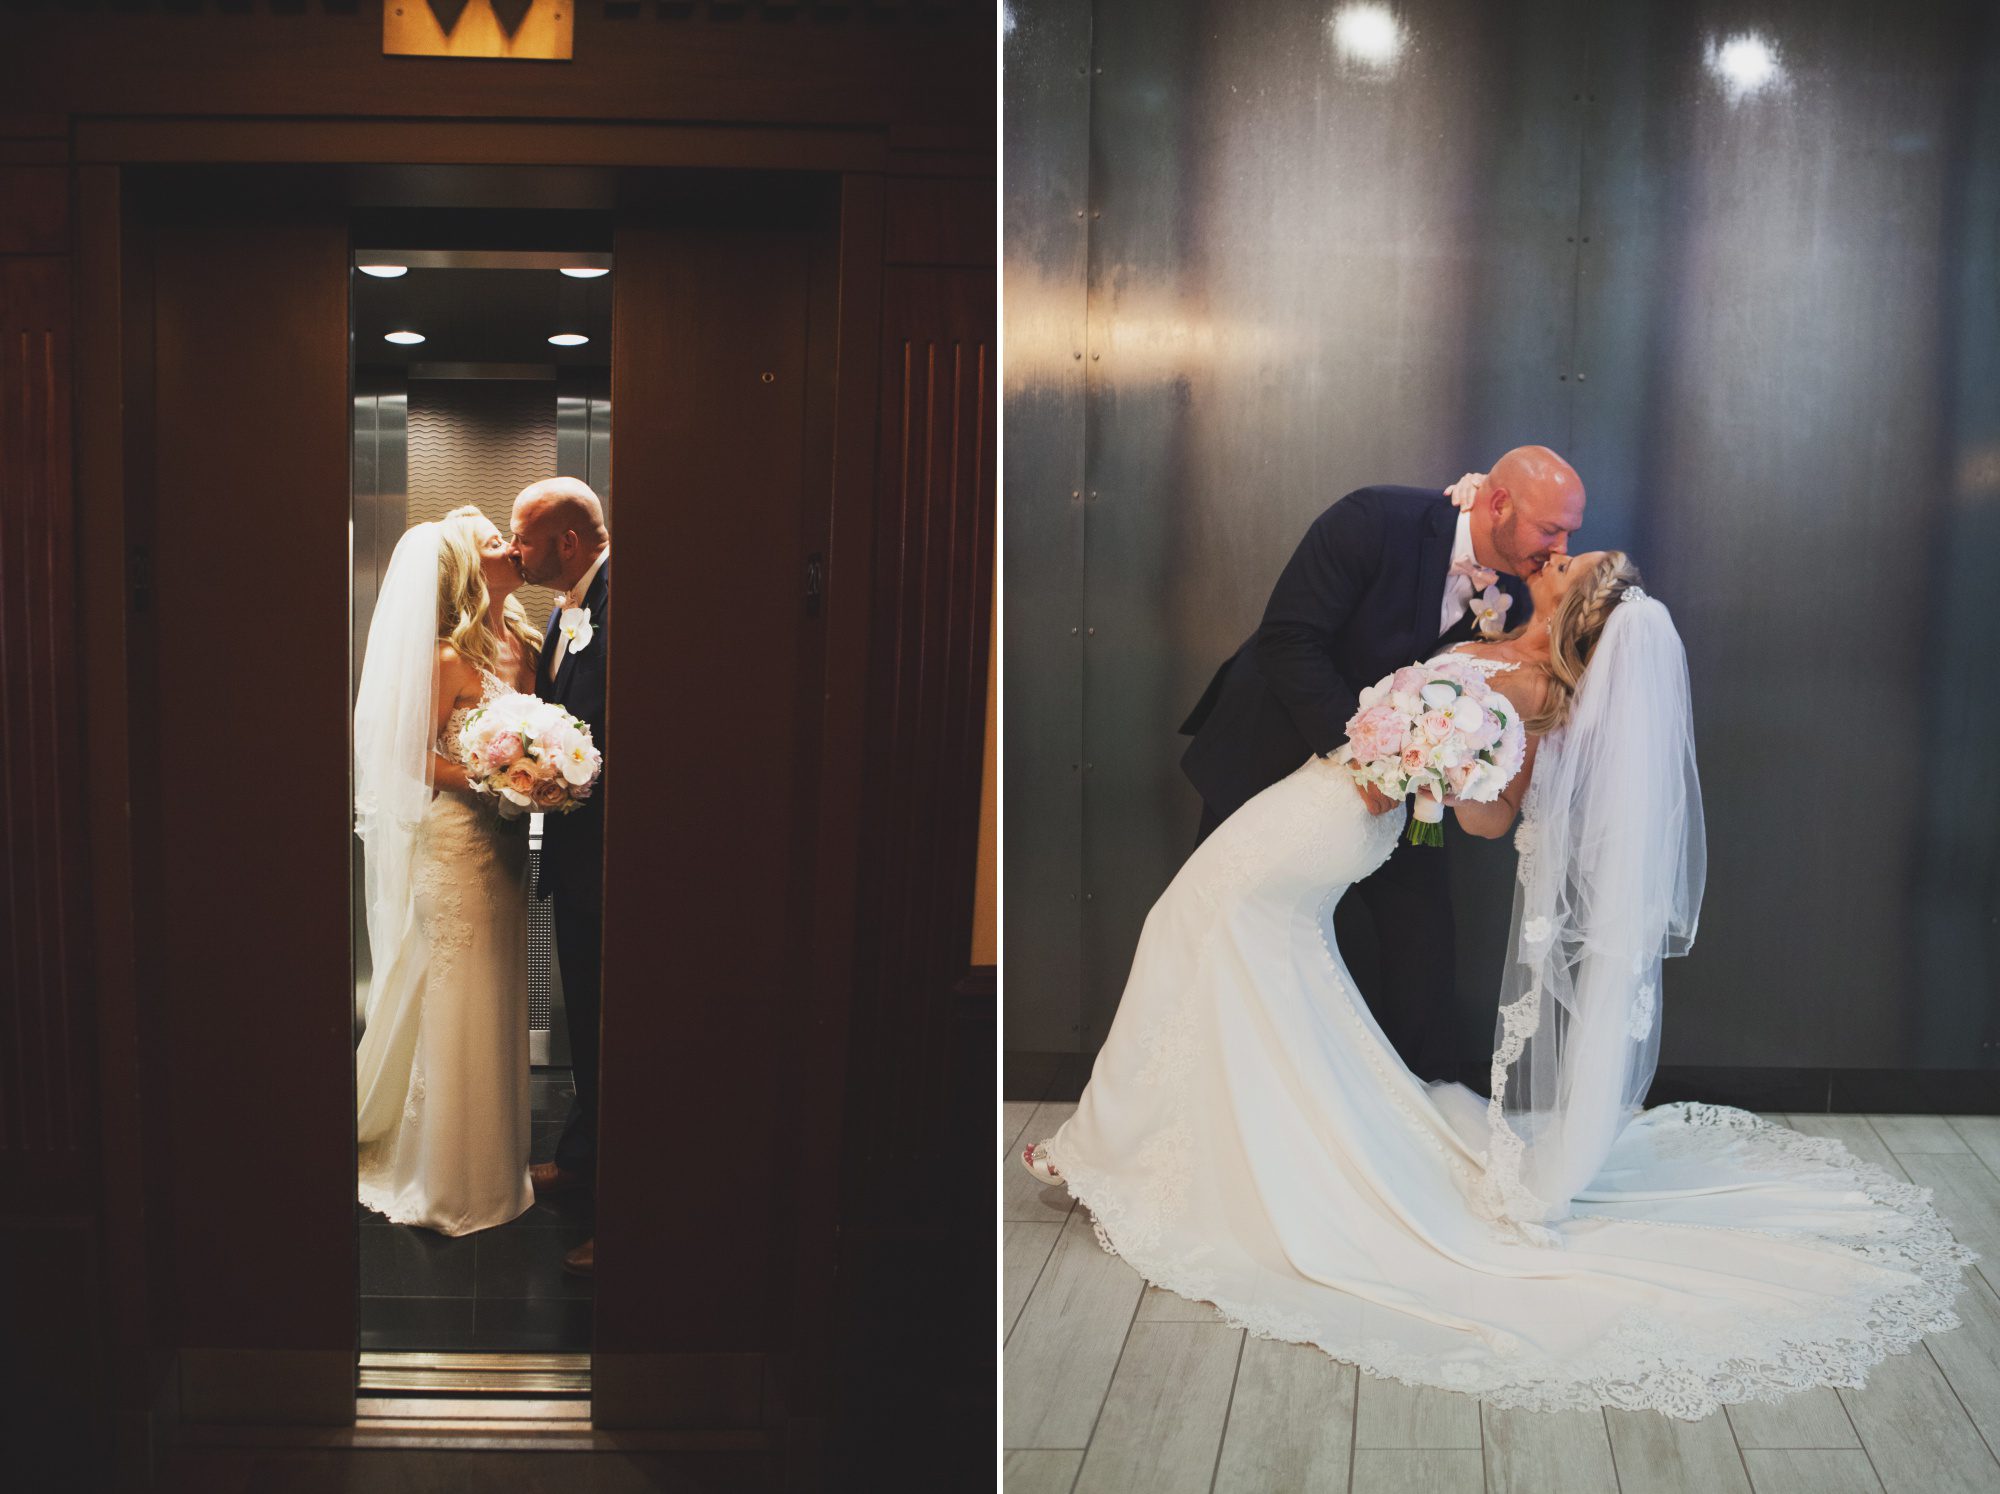 Bride and groom photos after wedding ceremony at City Club Nashville TN. Photography by Krista Lee Photography. 